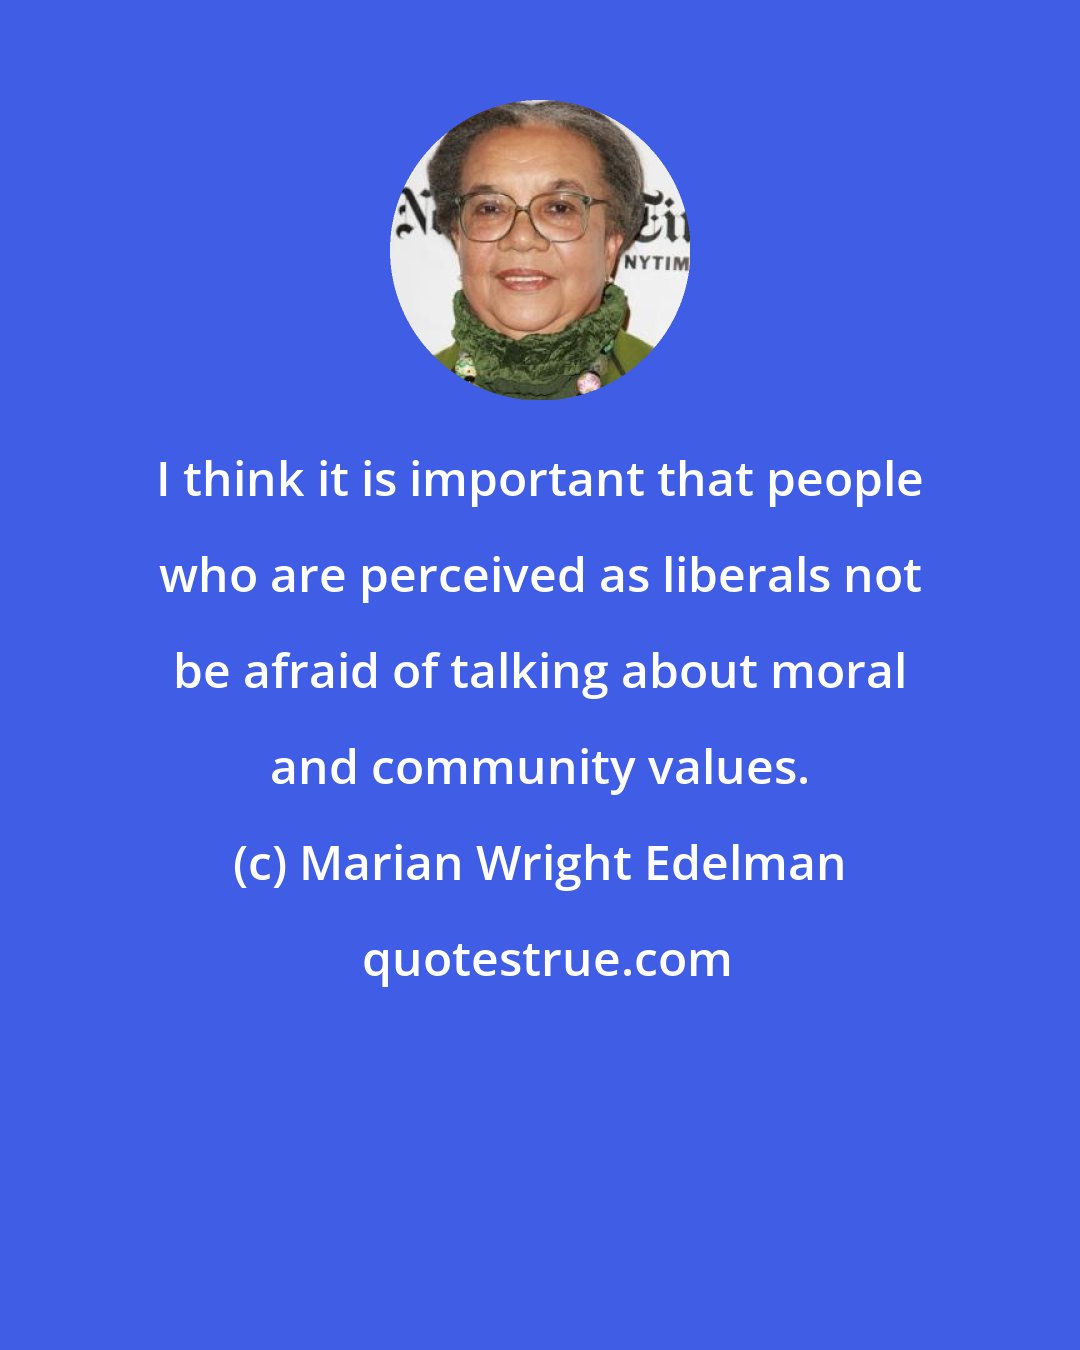 Marian Wright Edelman: I think it is important that people who are perceived as liberals not be afraid of talking about moral and community values.